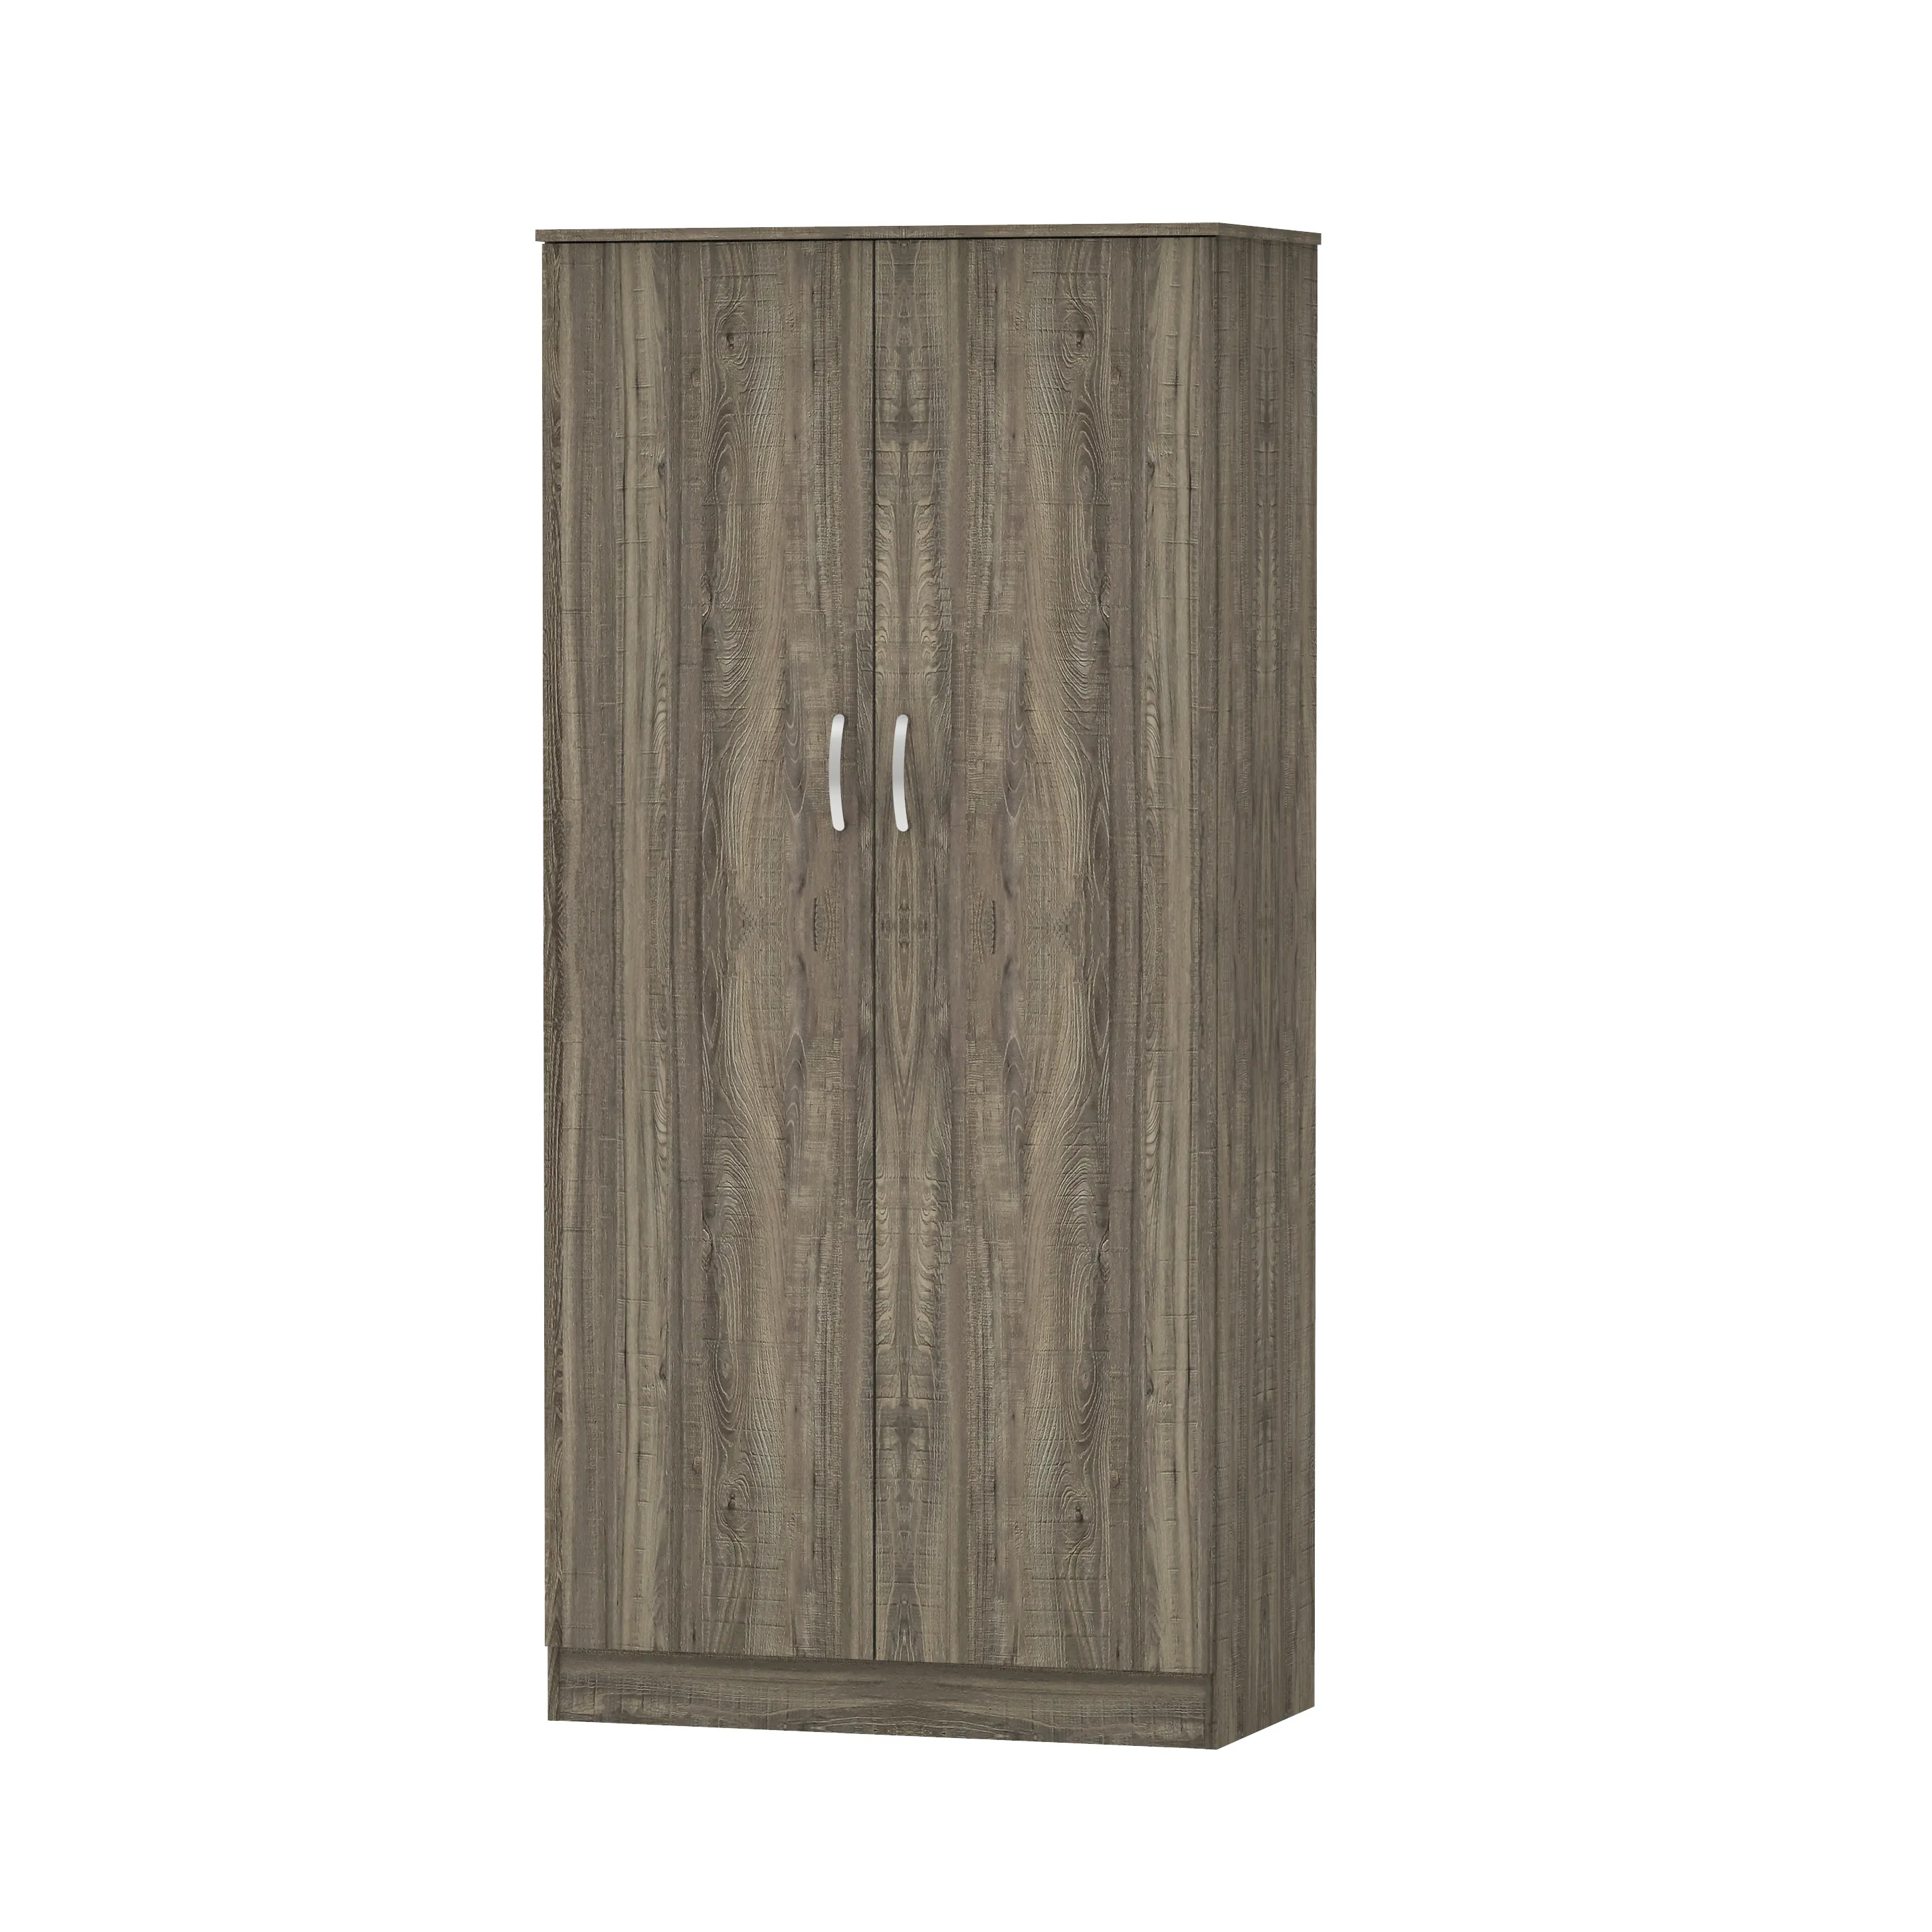 Famous Model 2 Door Clothes Wardrobe Hanging Area and 4 Shelves Wooden Cloth Storage Made in Malaysia 1292